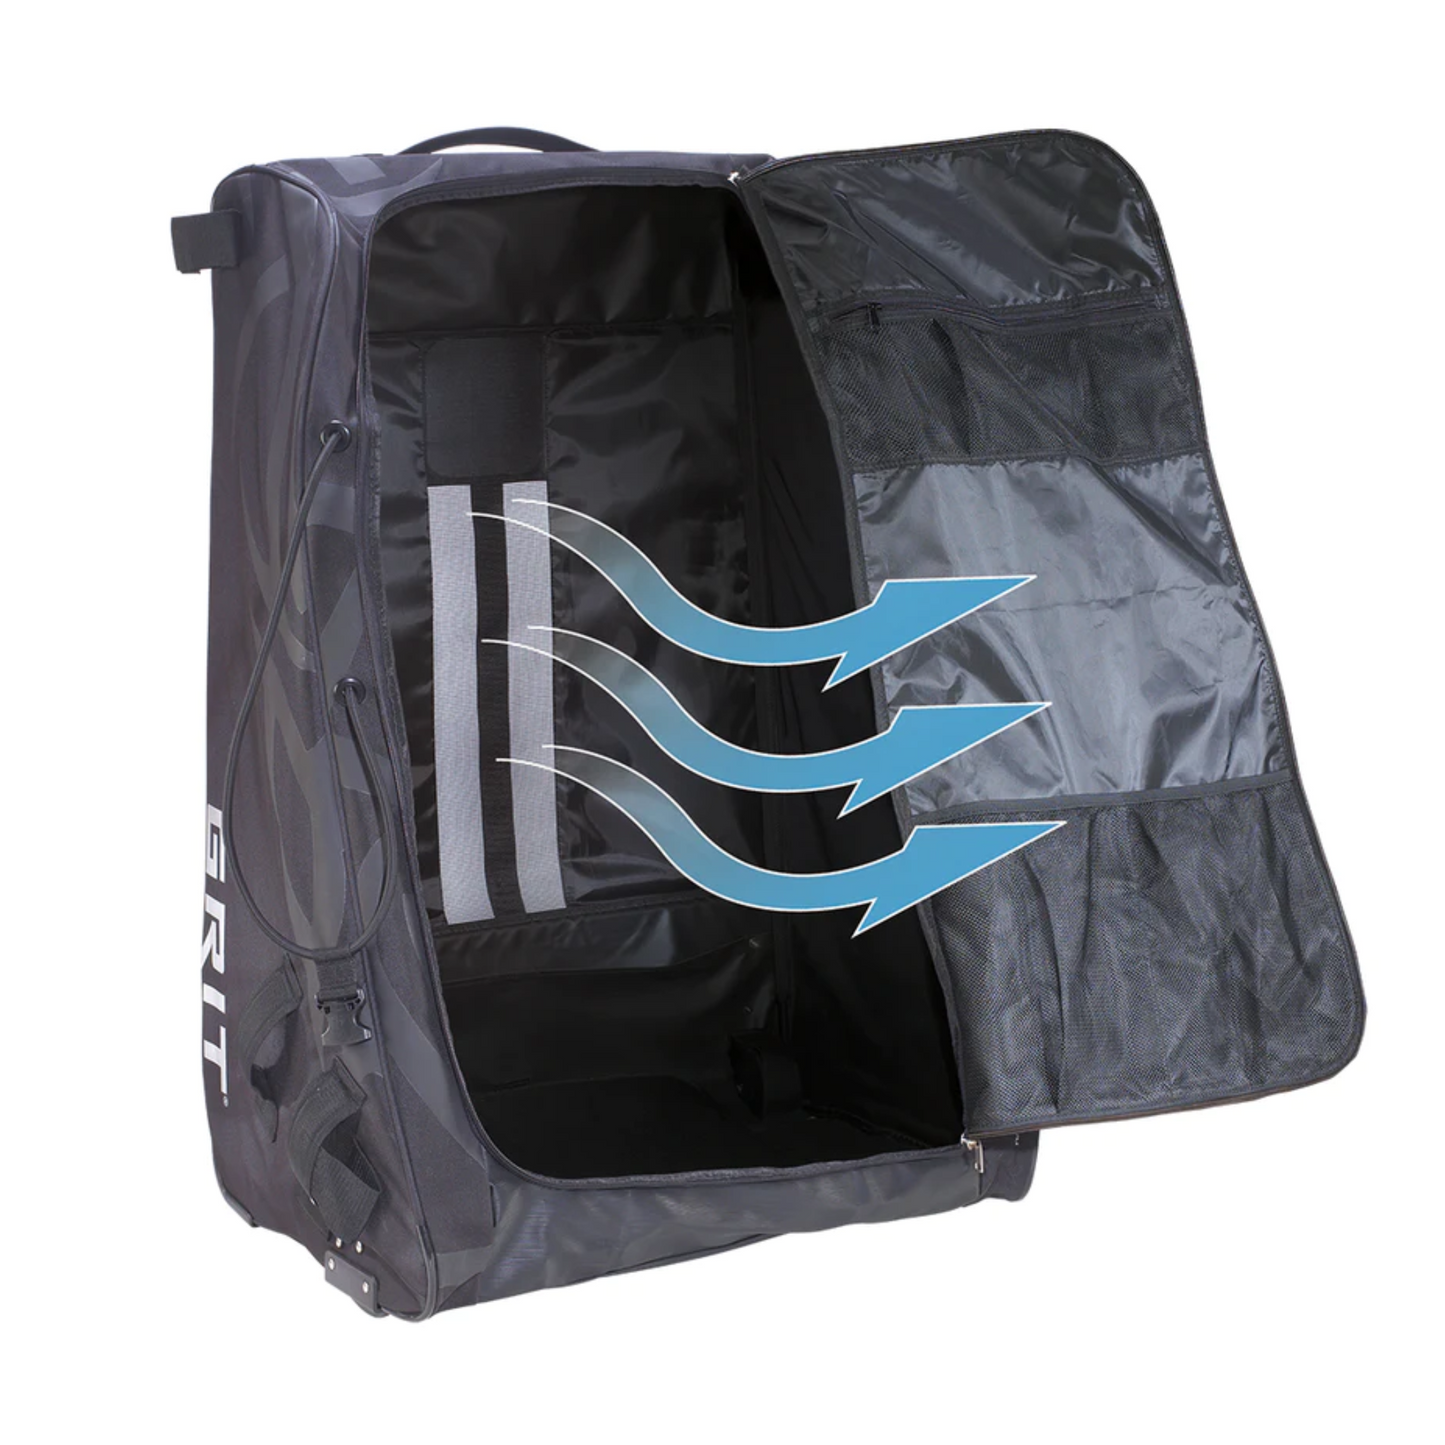 A photo of the GRIT GT4 Sumo Tower Goalie Hockey Bag 40" in colour black angled front view open bag empty.